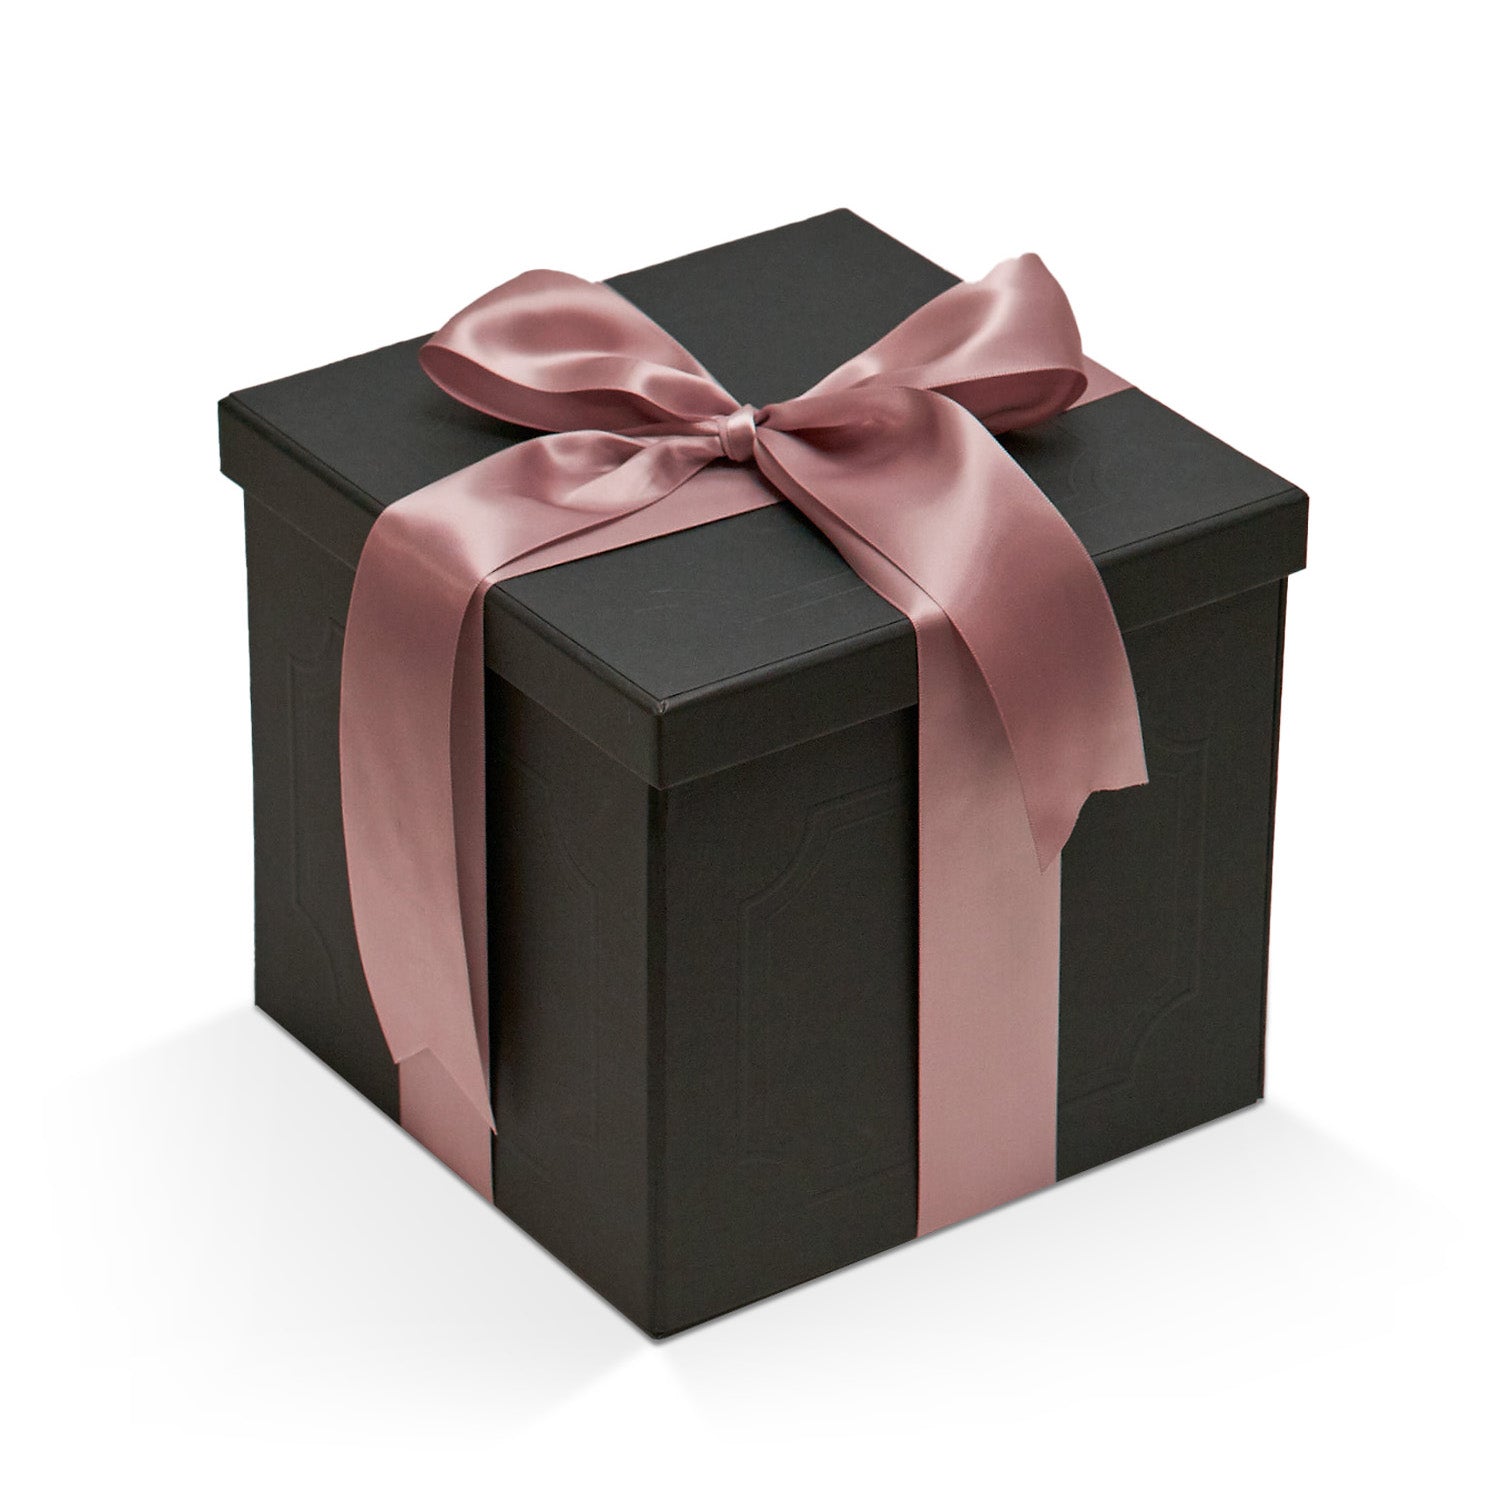 Amour Gift Box